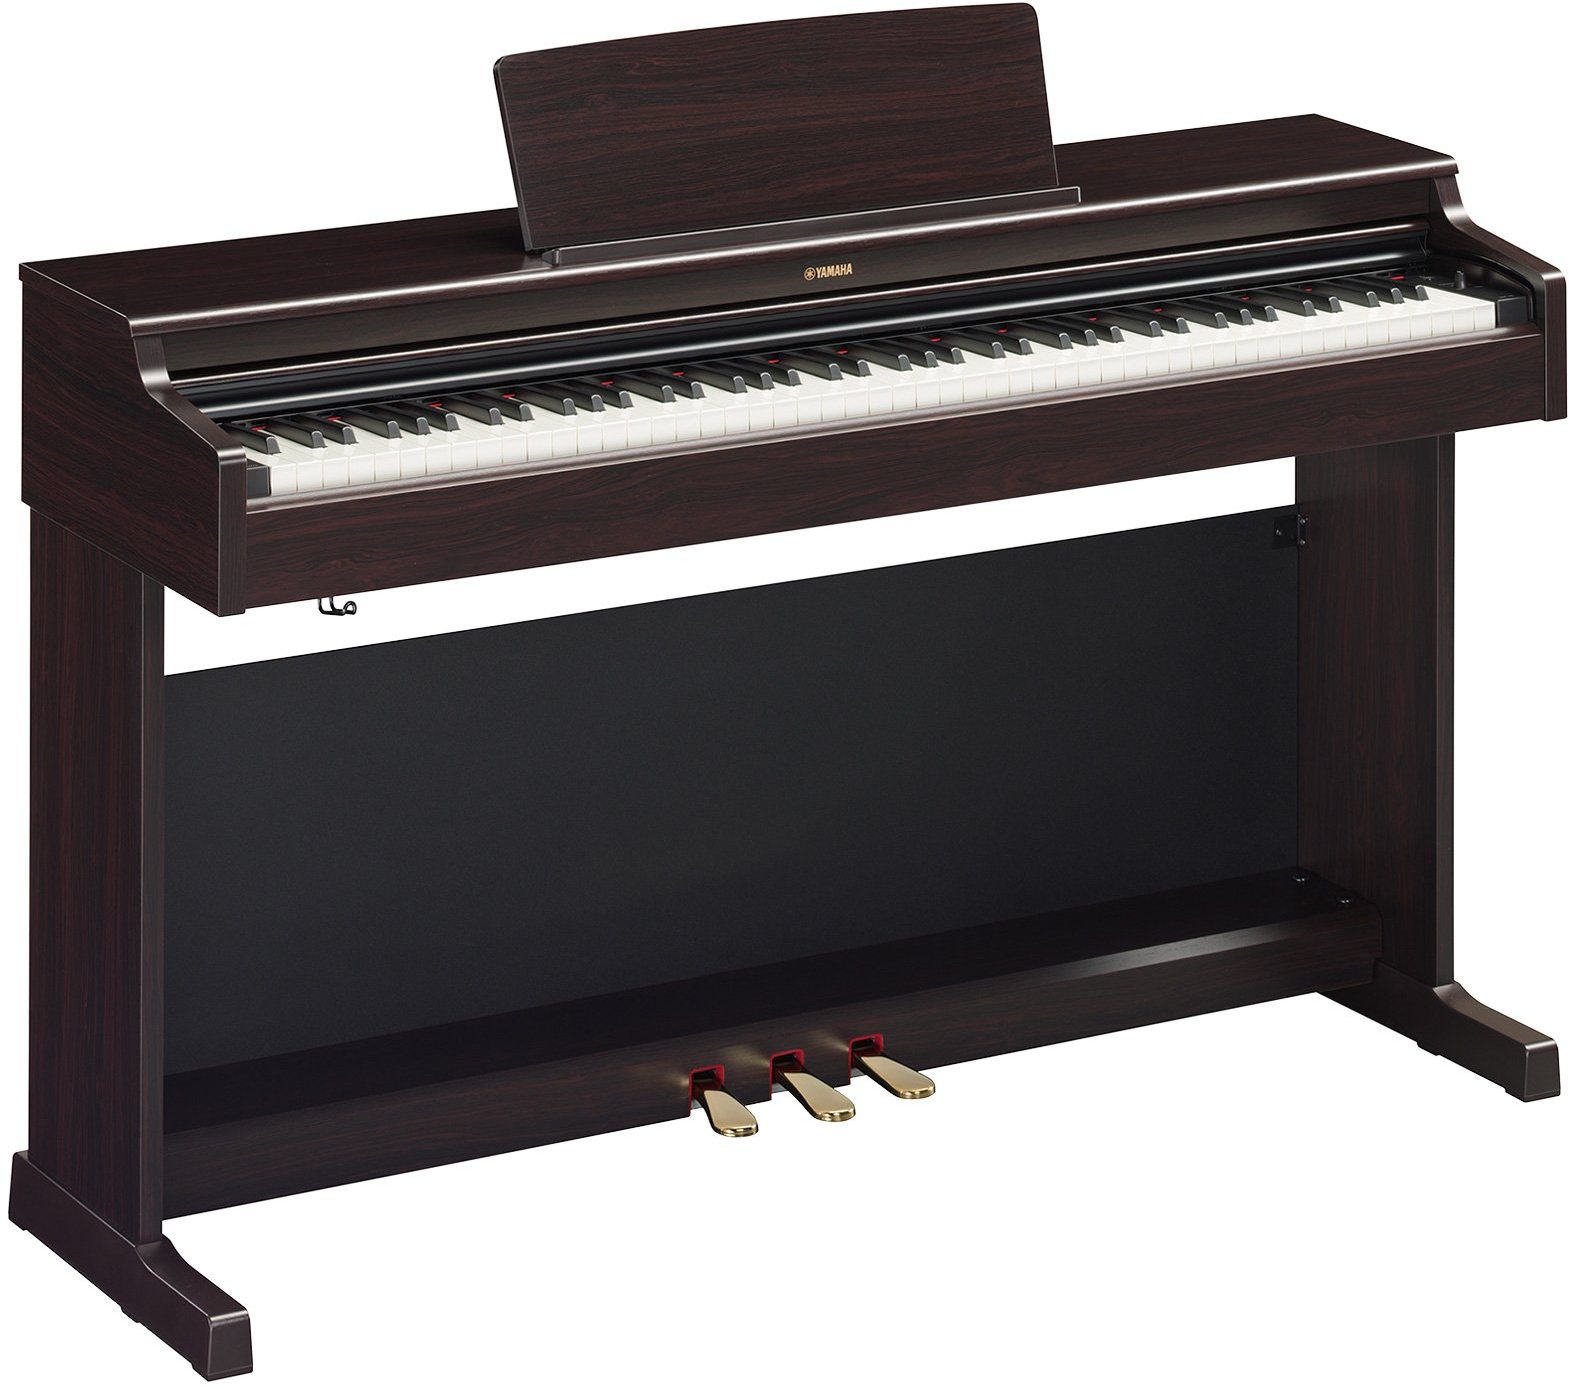 Yamaha Ydp-165 R - Digital piano with stand - Variation 1